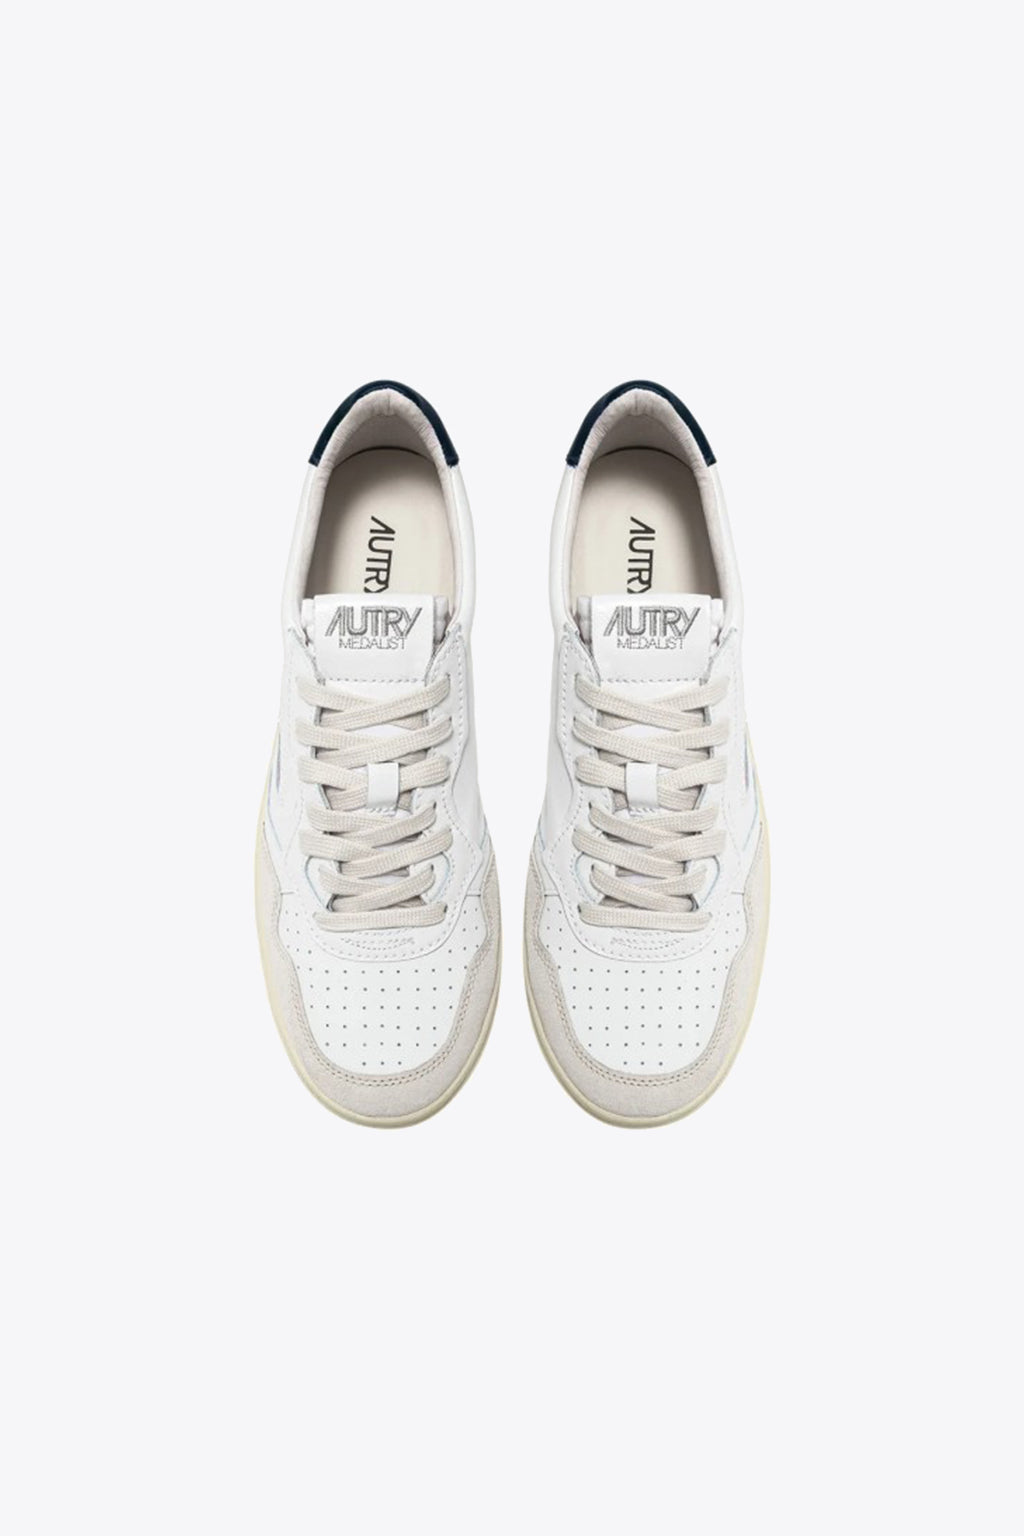 alt-image__White-leather-low-sneaker-with-blu-tab---Medalist